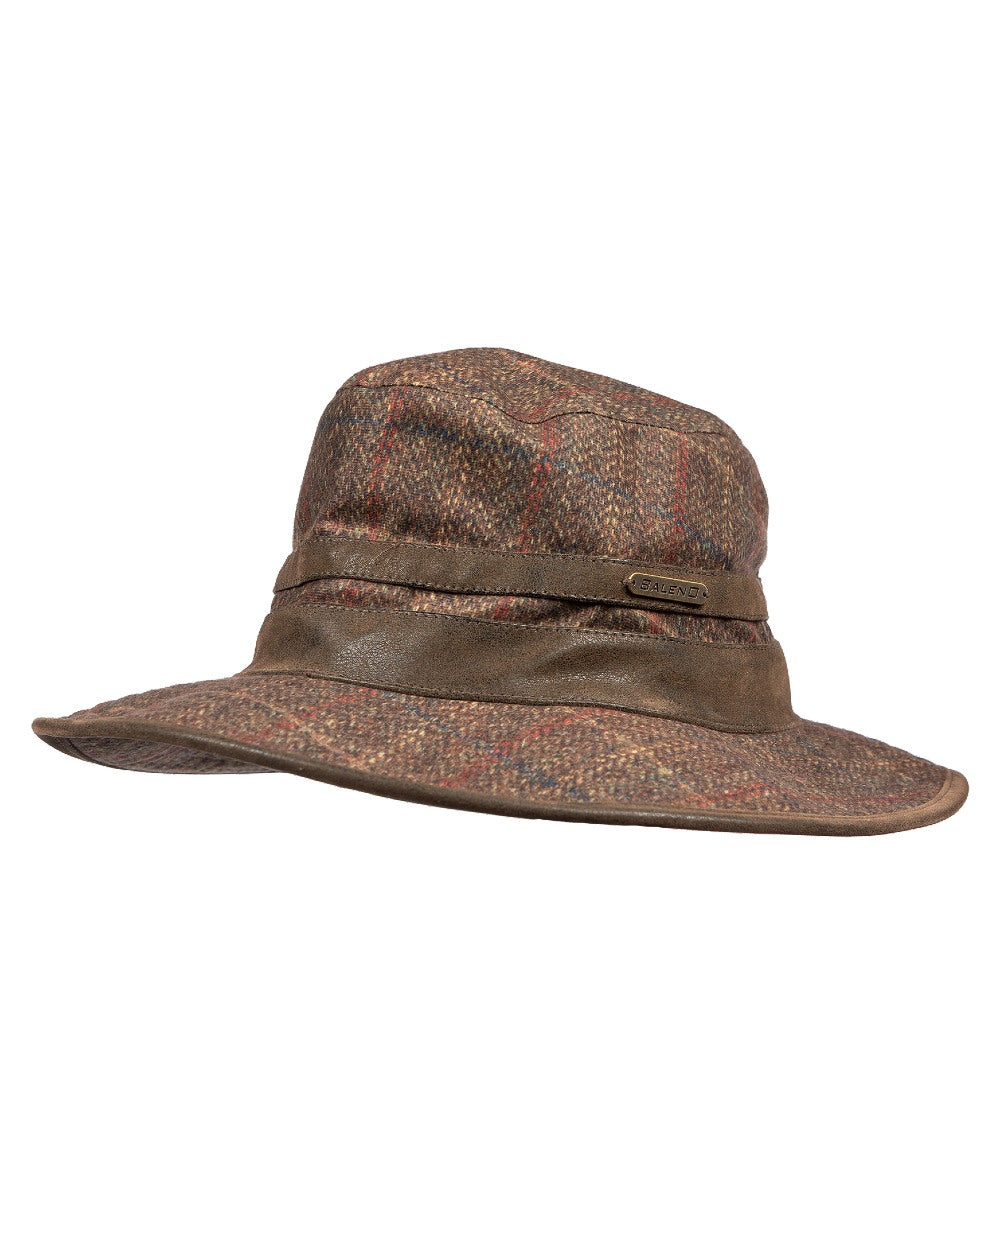 Baleno Caitlin Printed Tweed Hat in Check Brown 